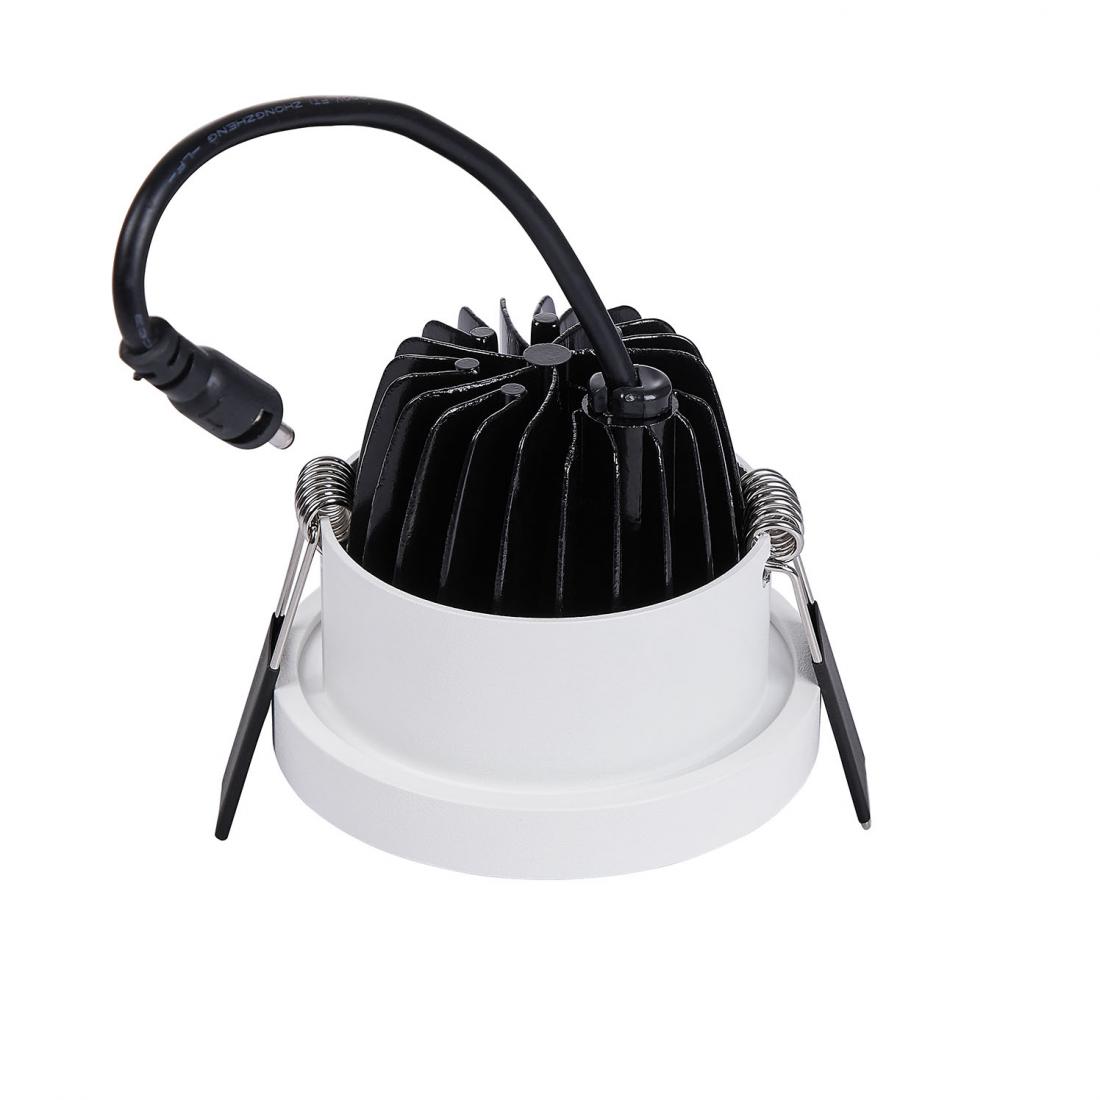 Commercial 3000k white color led round recessed downlight 